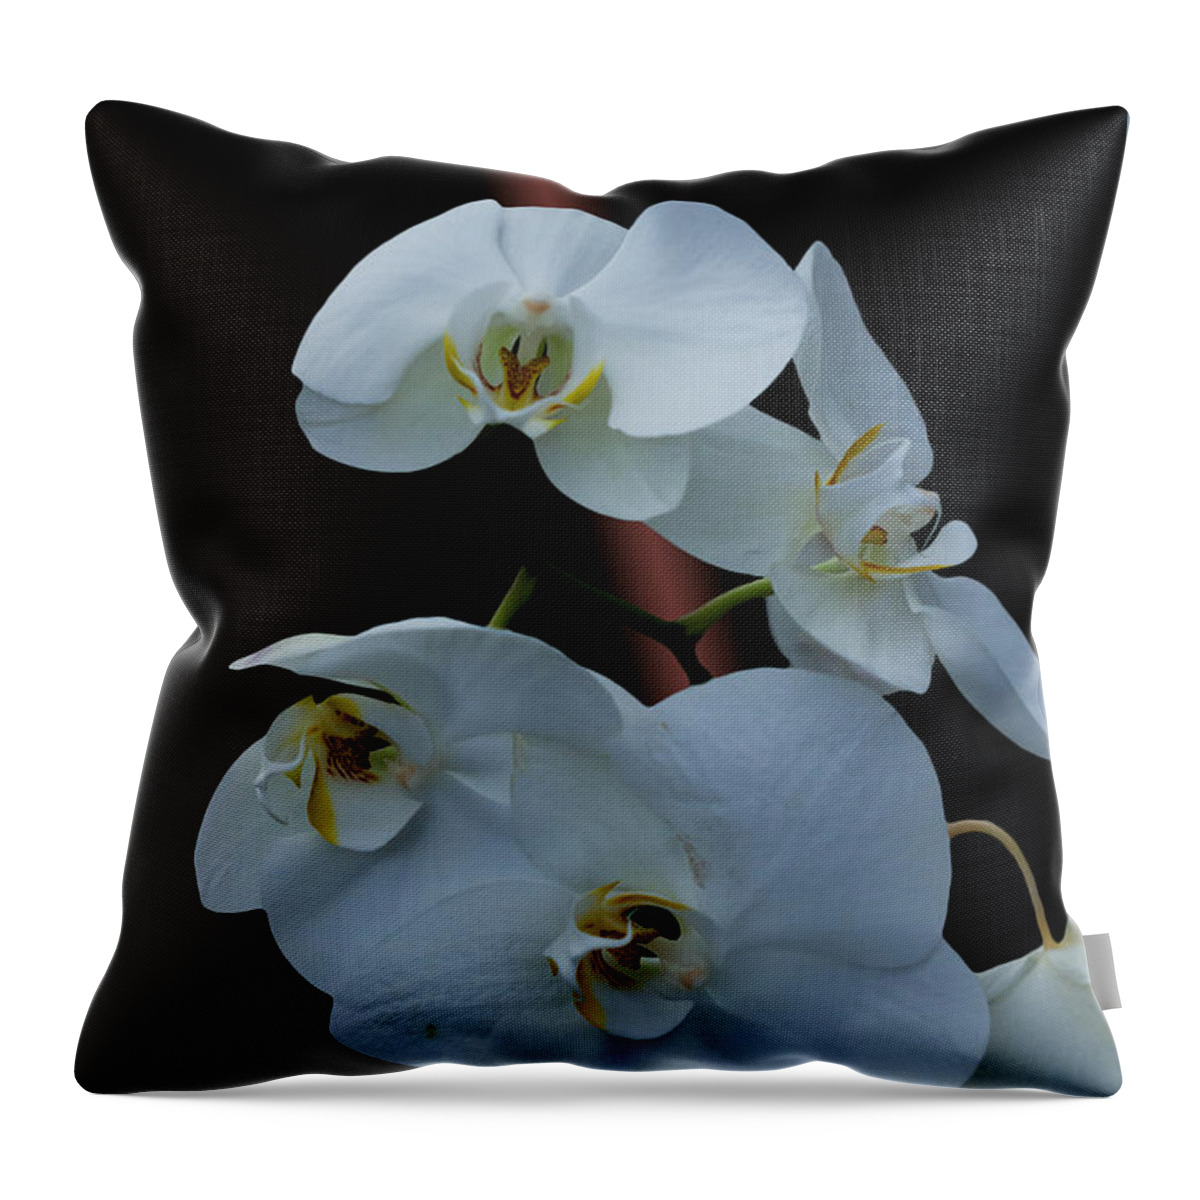 #orchids Throw Pillow featuring the photograph Simple Elegance by Ramabhadran Thirupattur